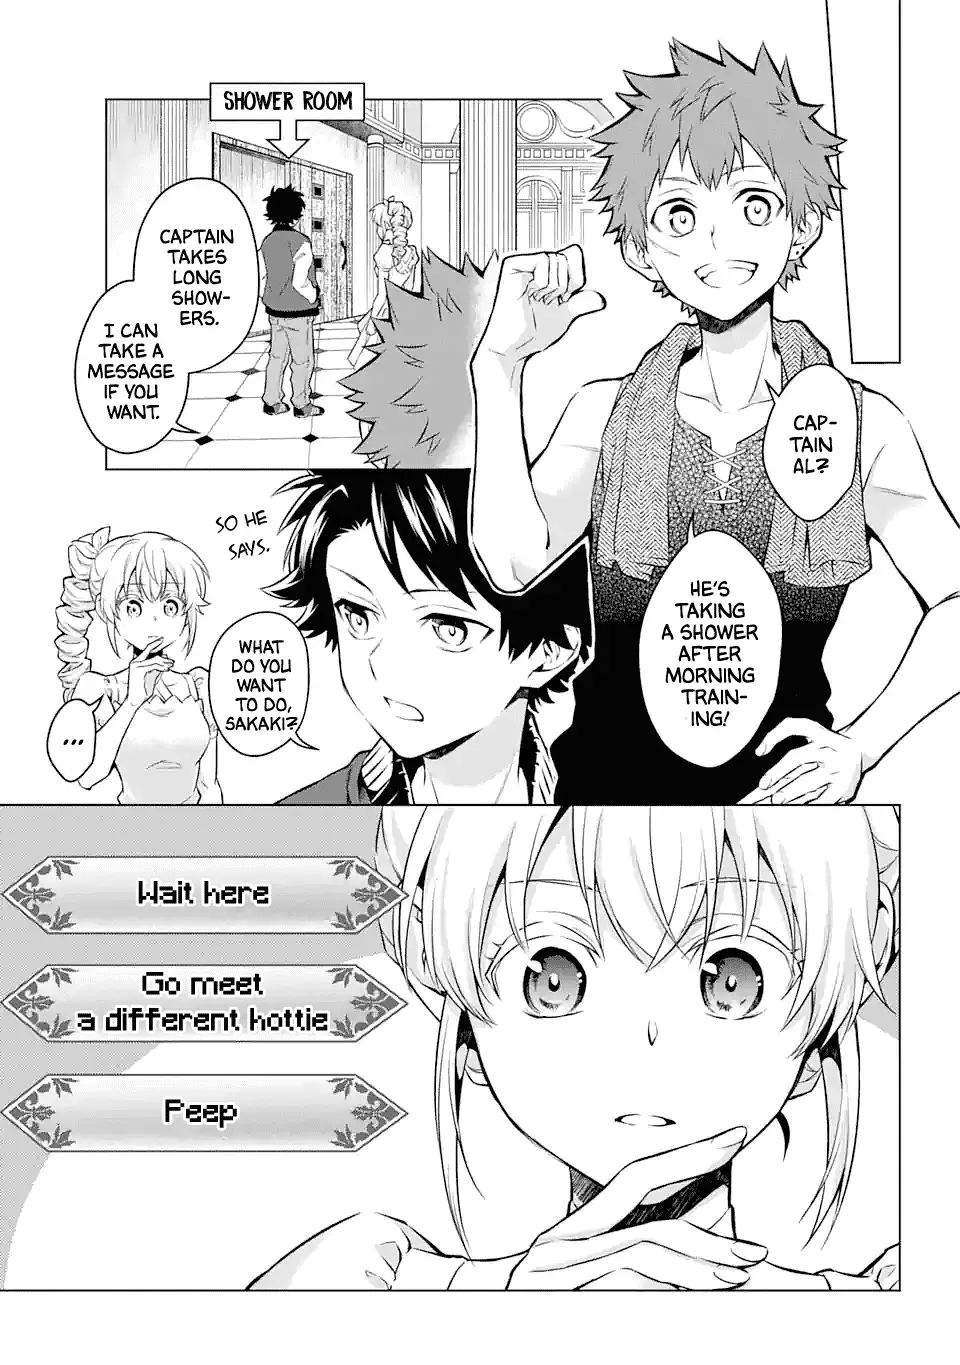 Transferred To Another World, But I'm Saving The World Of An Otome Game!? - 22 page 5-e26c2c0f